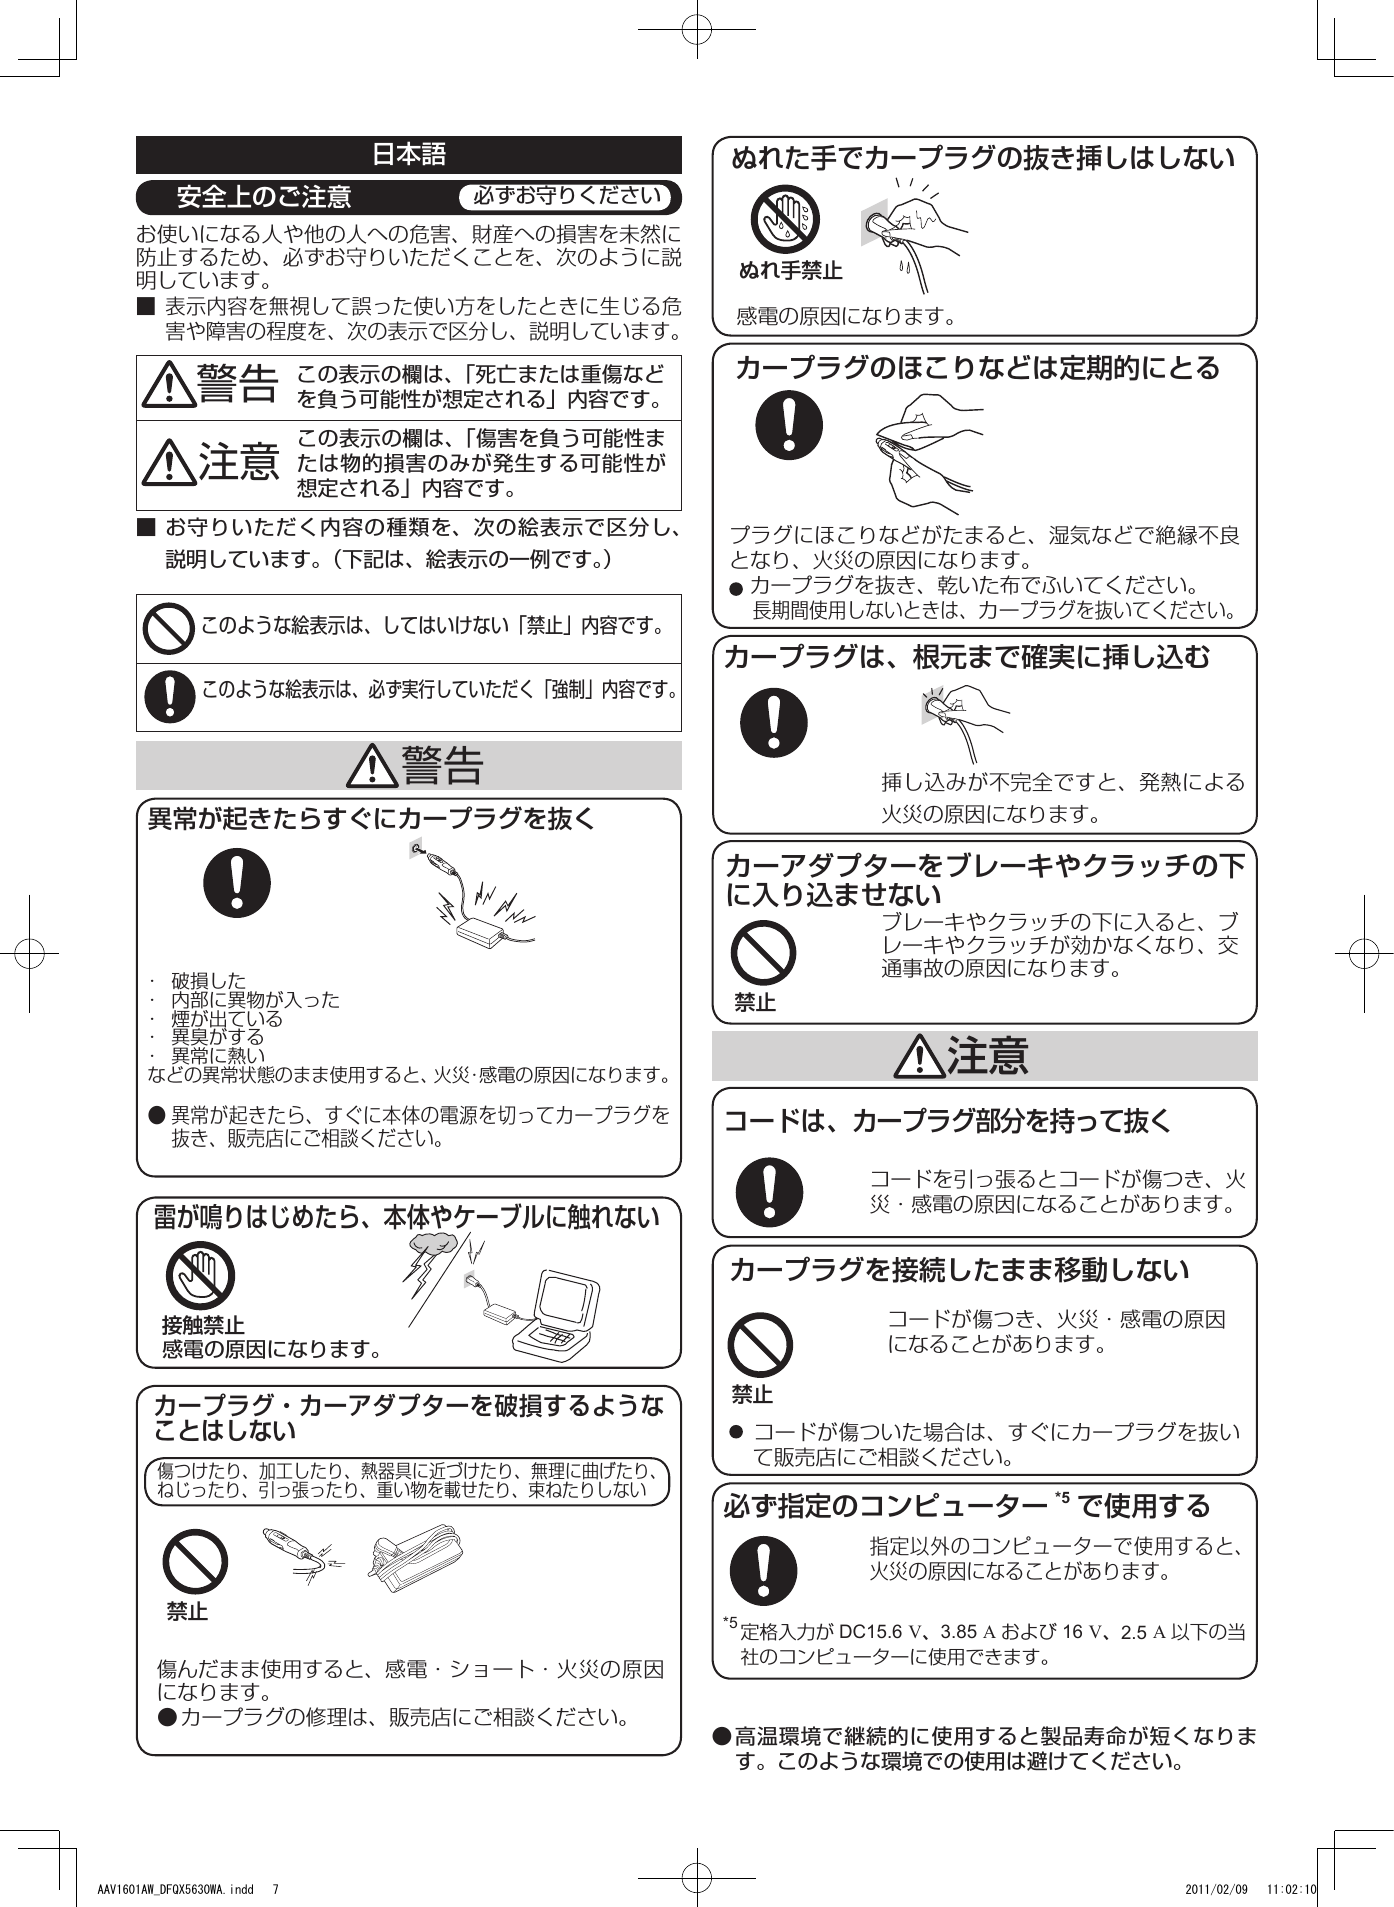 Page 6 of 8 - Panasonic CF-AAxxxx (AC Adapter) 使用手册 : Operating Instructions (English/ German/ French/ Chinese[S]/ Chinese[T]/ Korean/ Japanese) (Revision) Aav1601aw-oi-dfqx5630wa-non-nonlogo-JMGFCSCTKO-p20110072